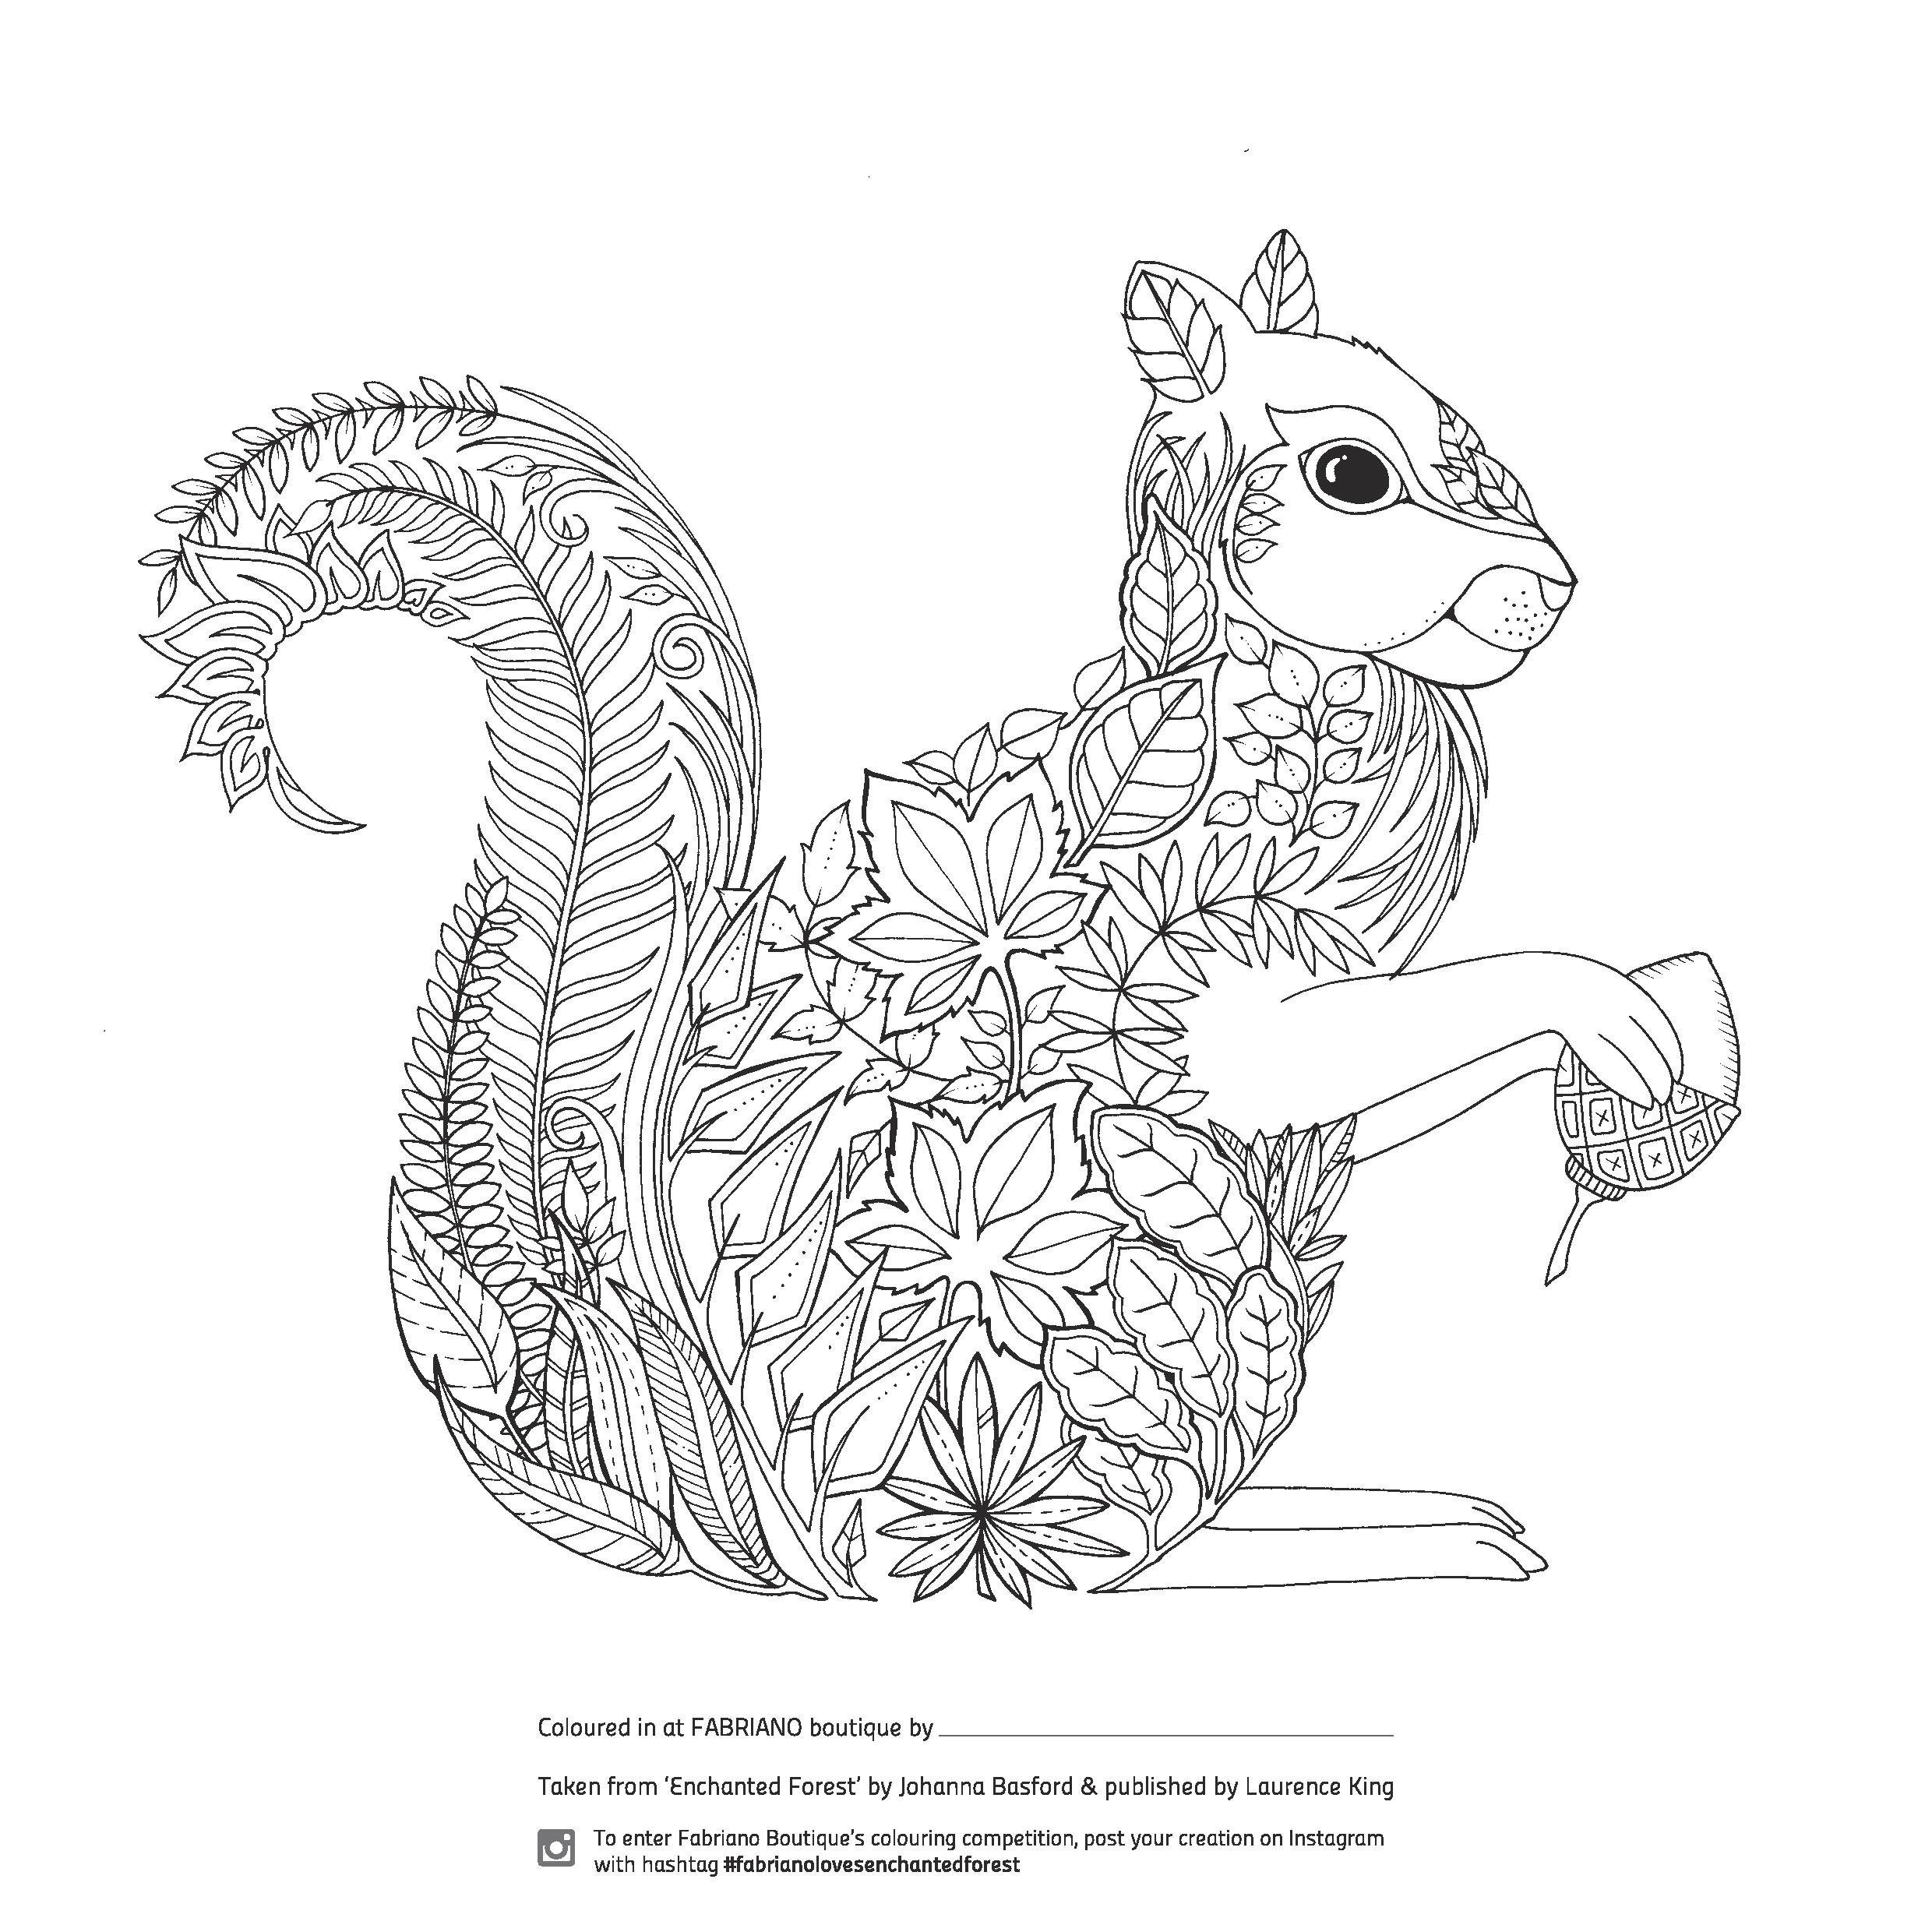 Enchanted Forest Adult Coloring Book
 Enchanted Forest Colouring petition at Fabriano